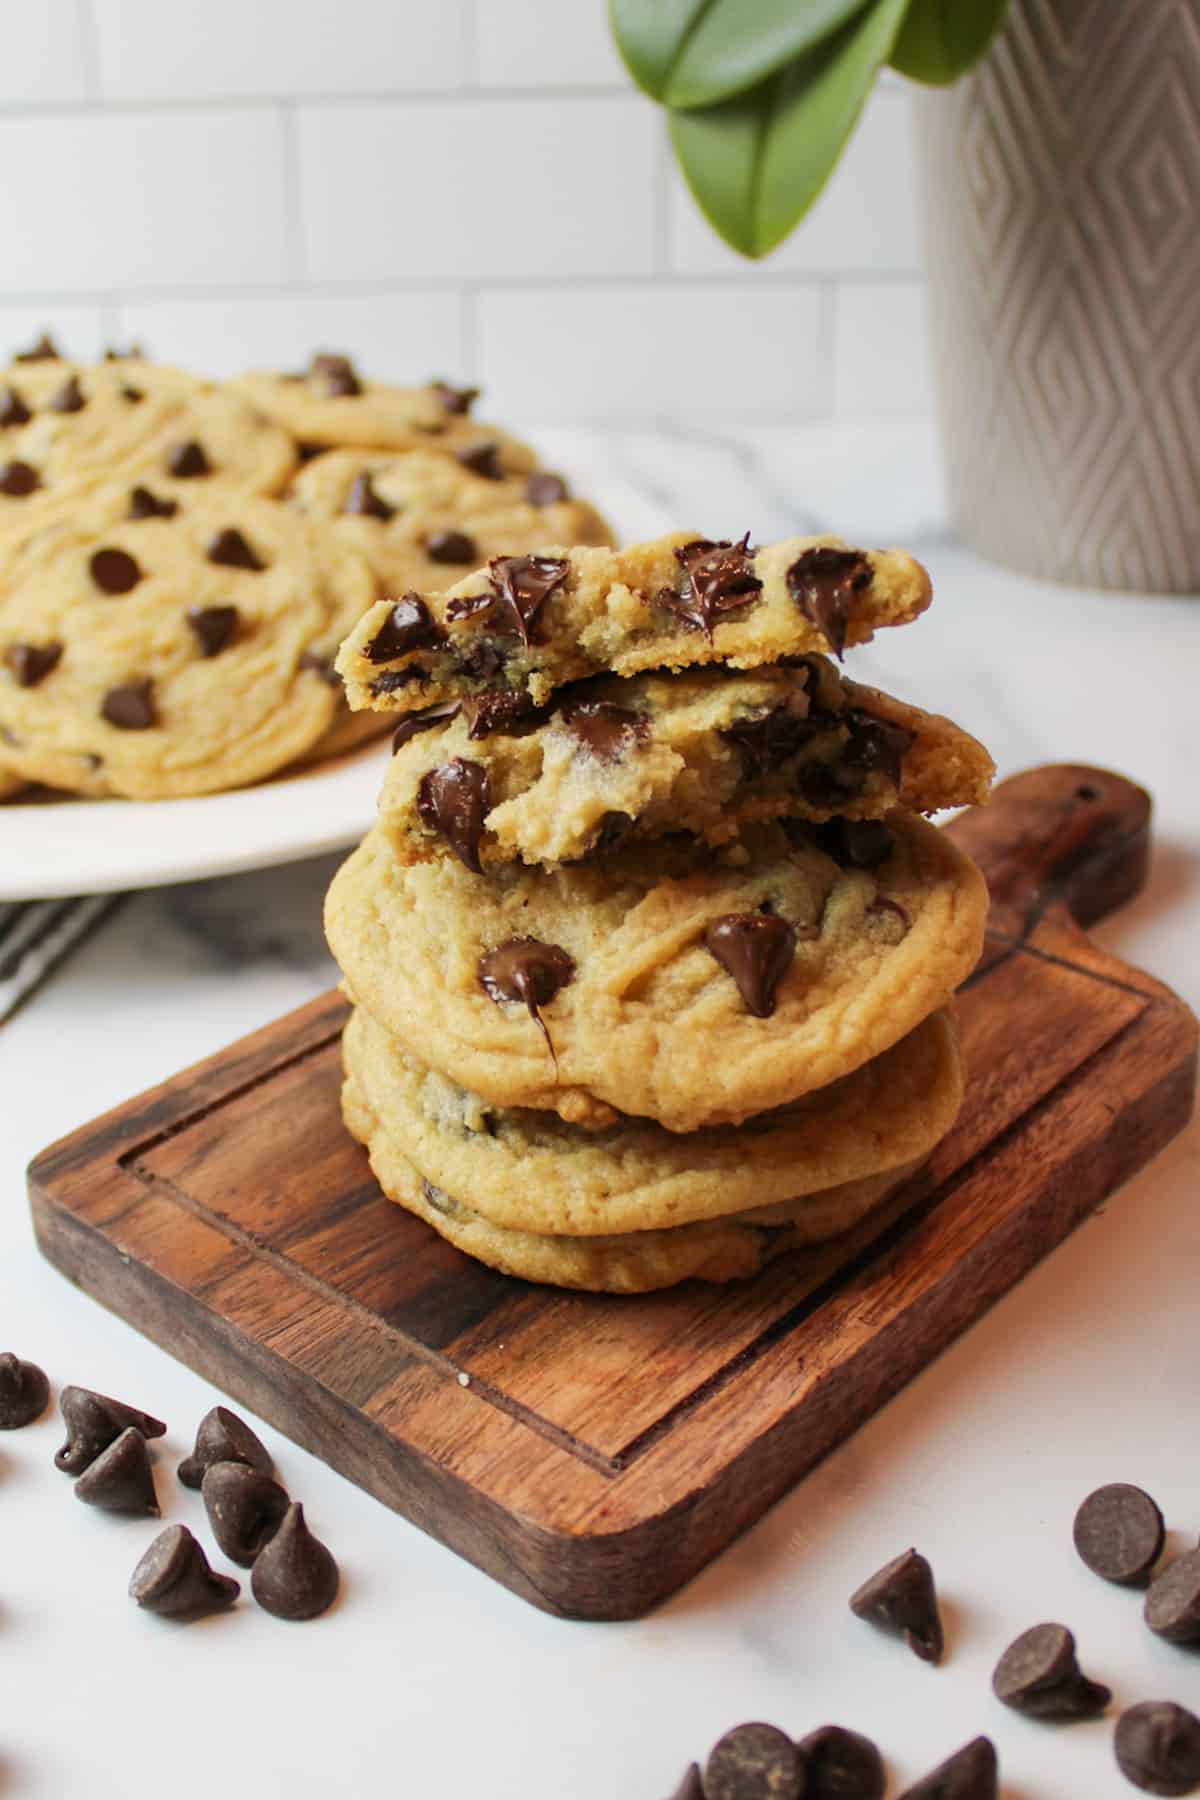 stacked chocolate chip cookies on a wooden boad with the top cookie broken in half.